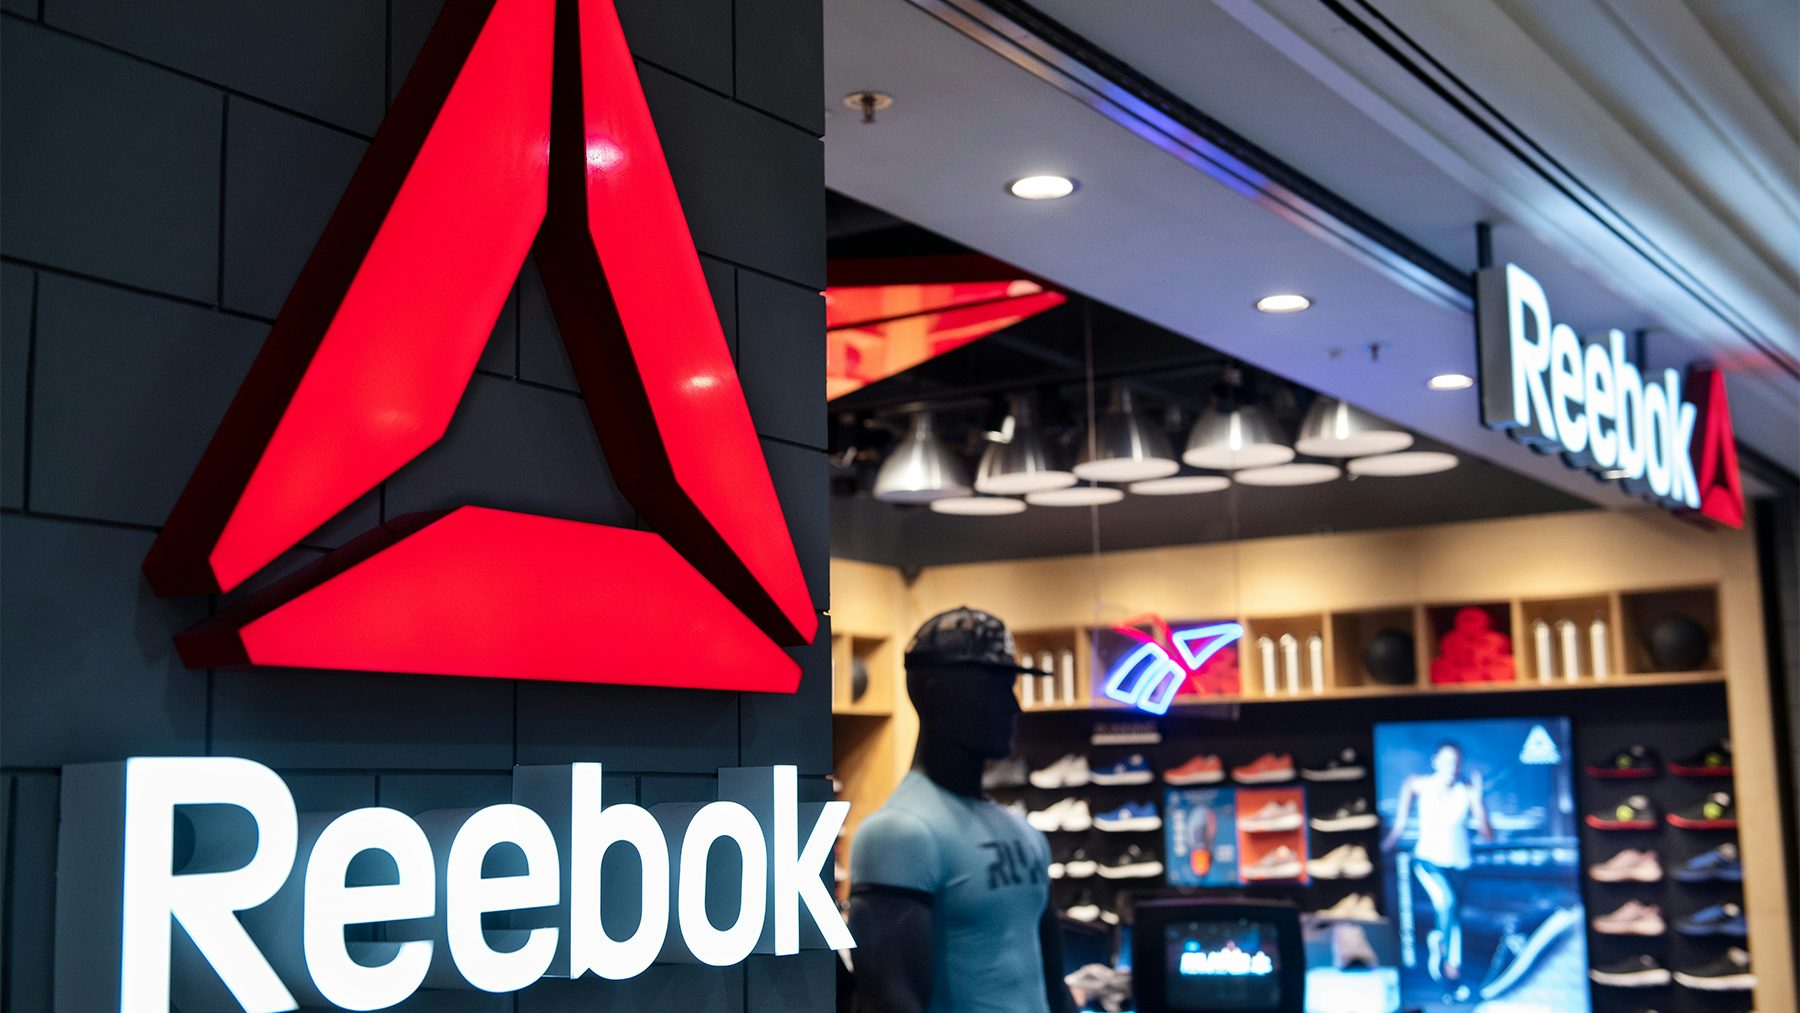 German sportswear maker Adidas has entered into an agreement to sell Reebok to Authentic Brands Group for $2.5 billion. Getty Images.